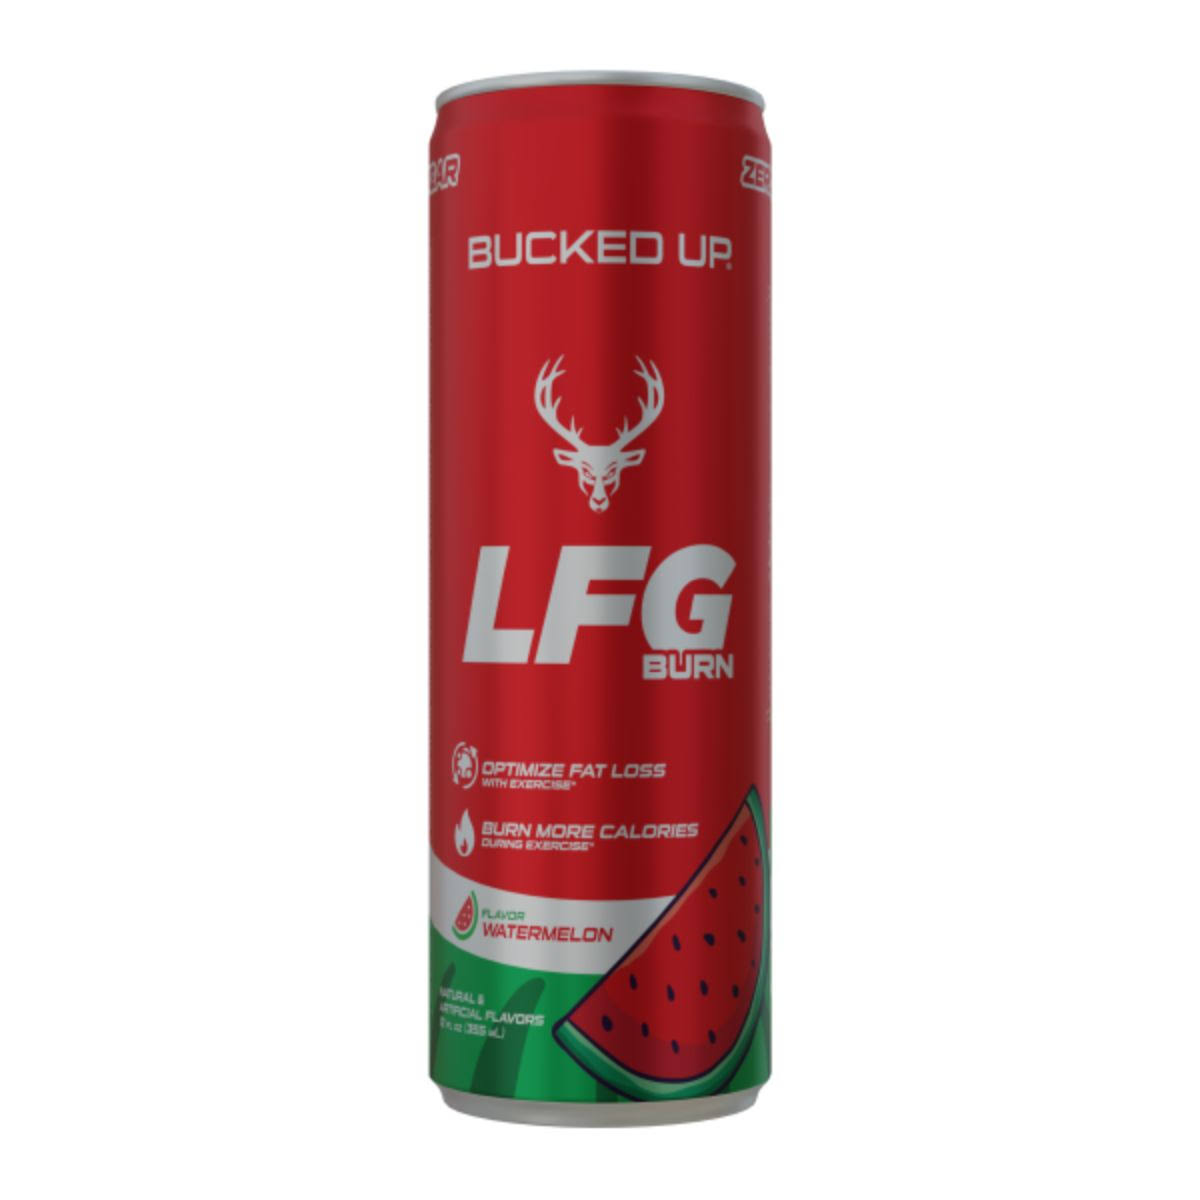 Bucked Up LFG Metabolism Boosting Energy Case (12 cans) / Watermelon